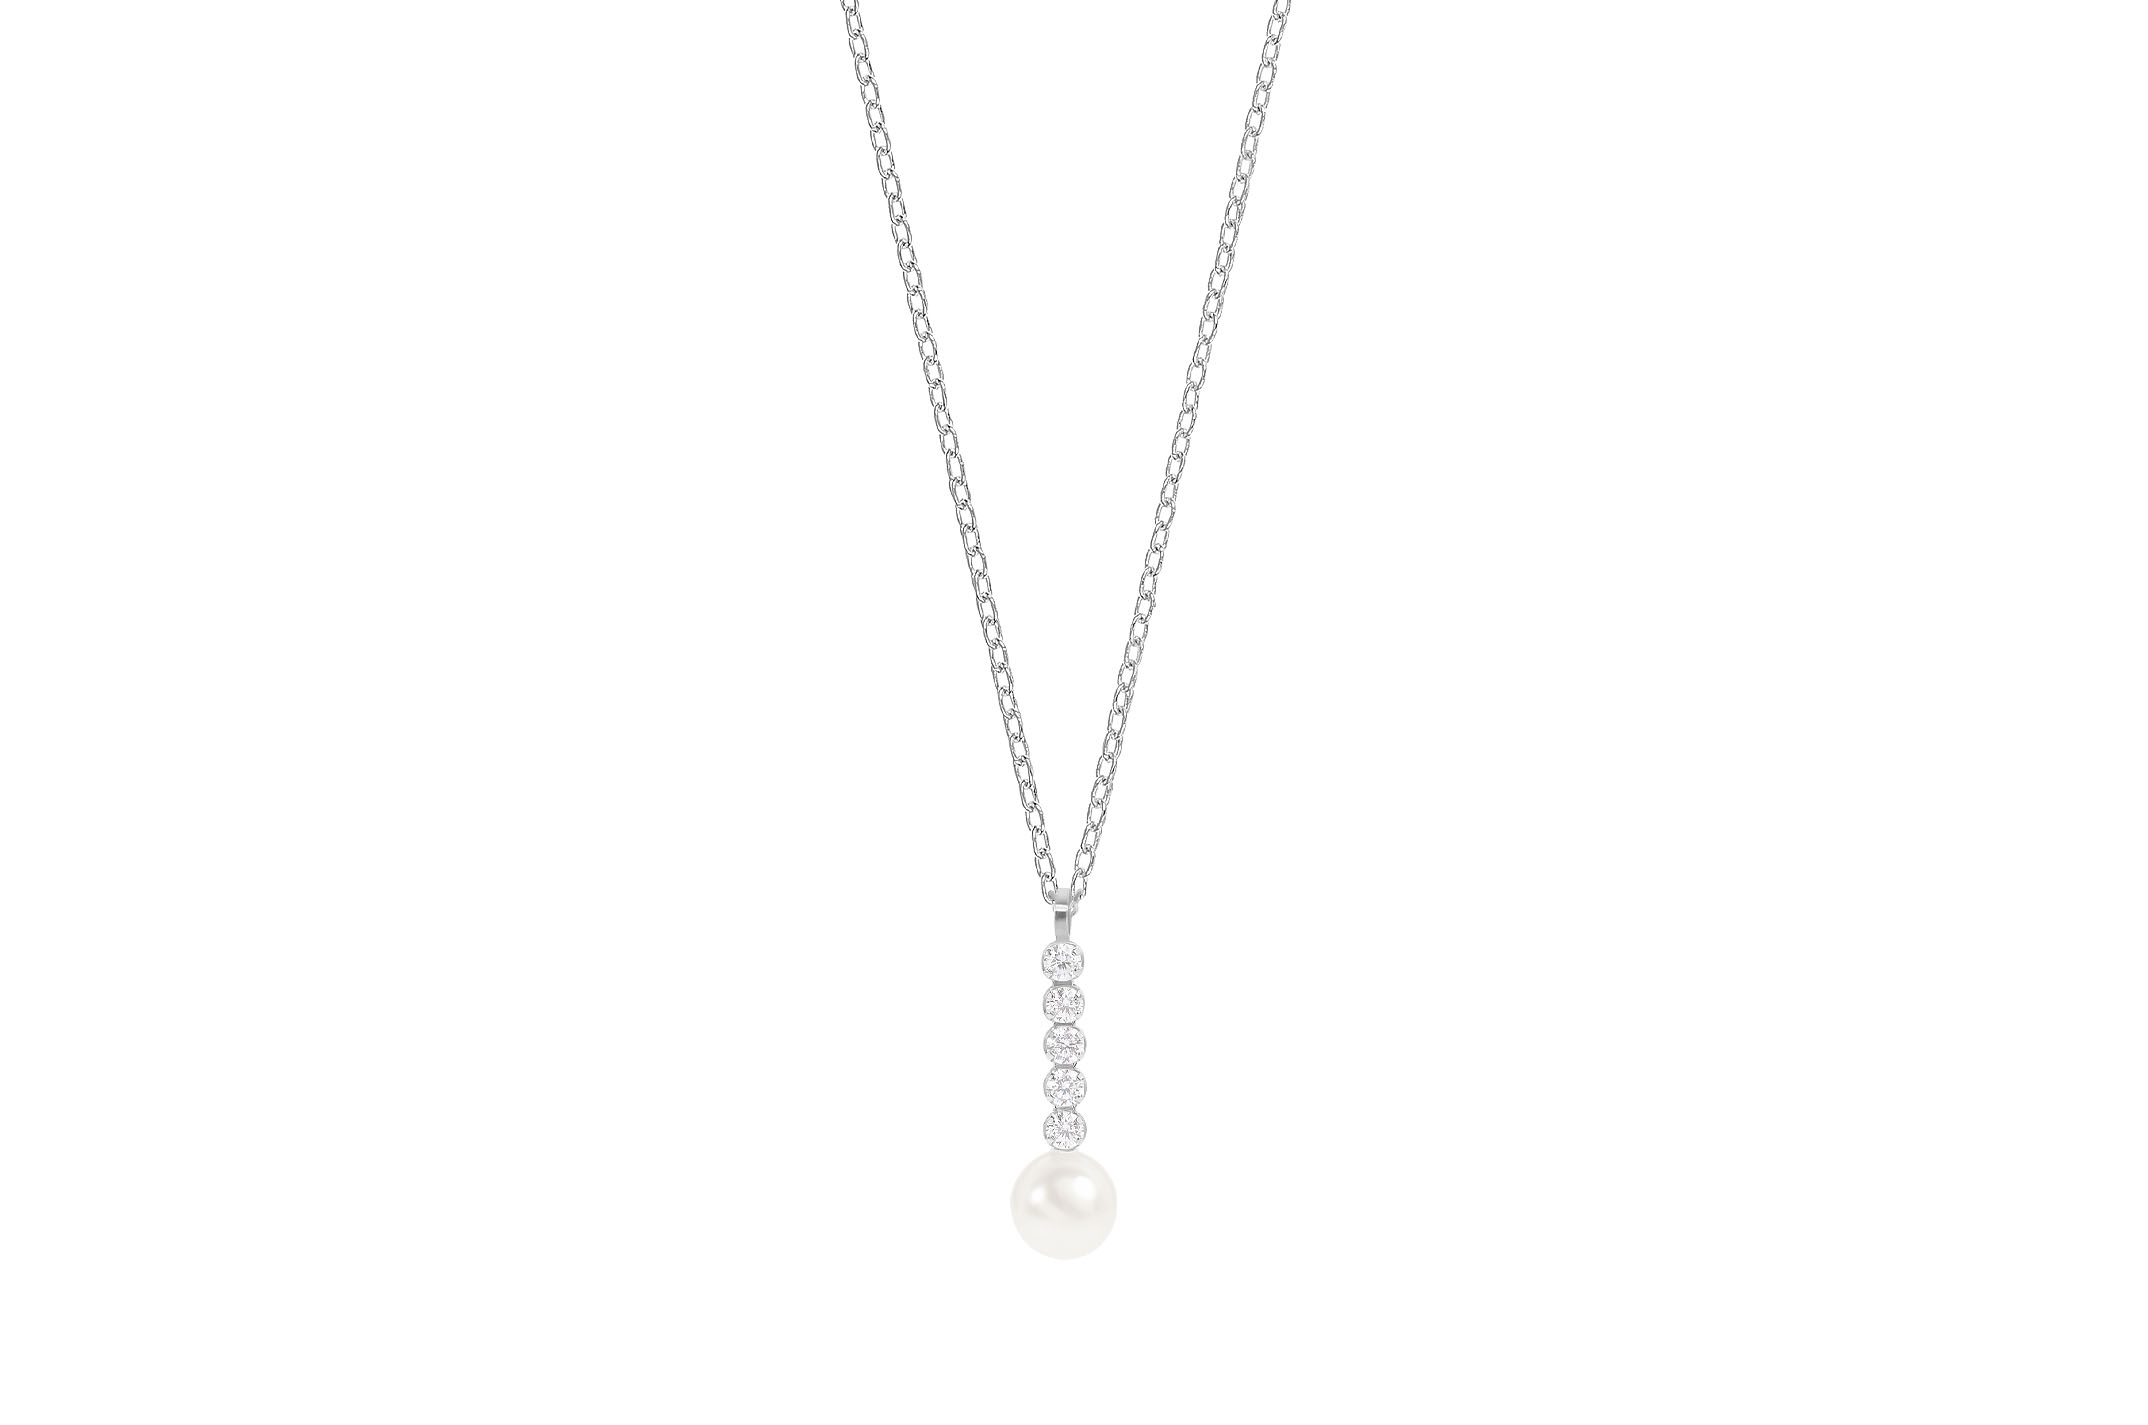 Jewel: necklace;Material: silver 925;Weight: 2.5 gr;Stone: pearl & zirconia;Color: white;Size: 40 cm + 4 cm;Pendent size: 2 cm;Gender: woman